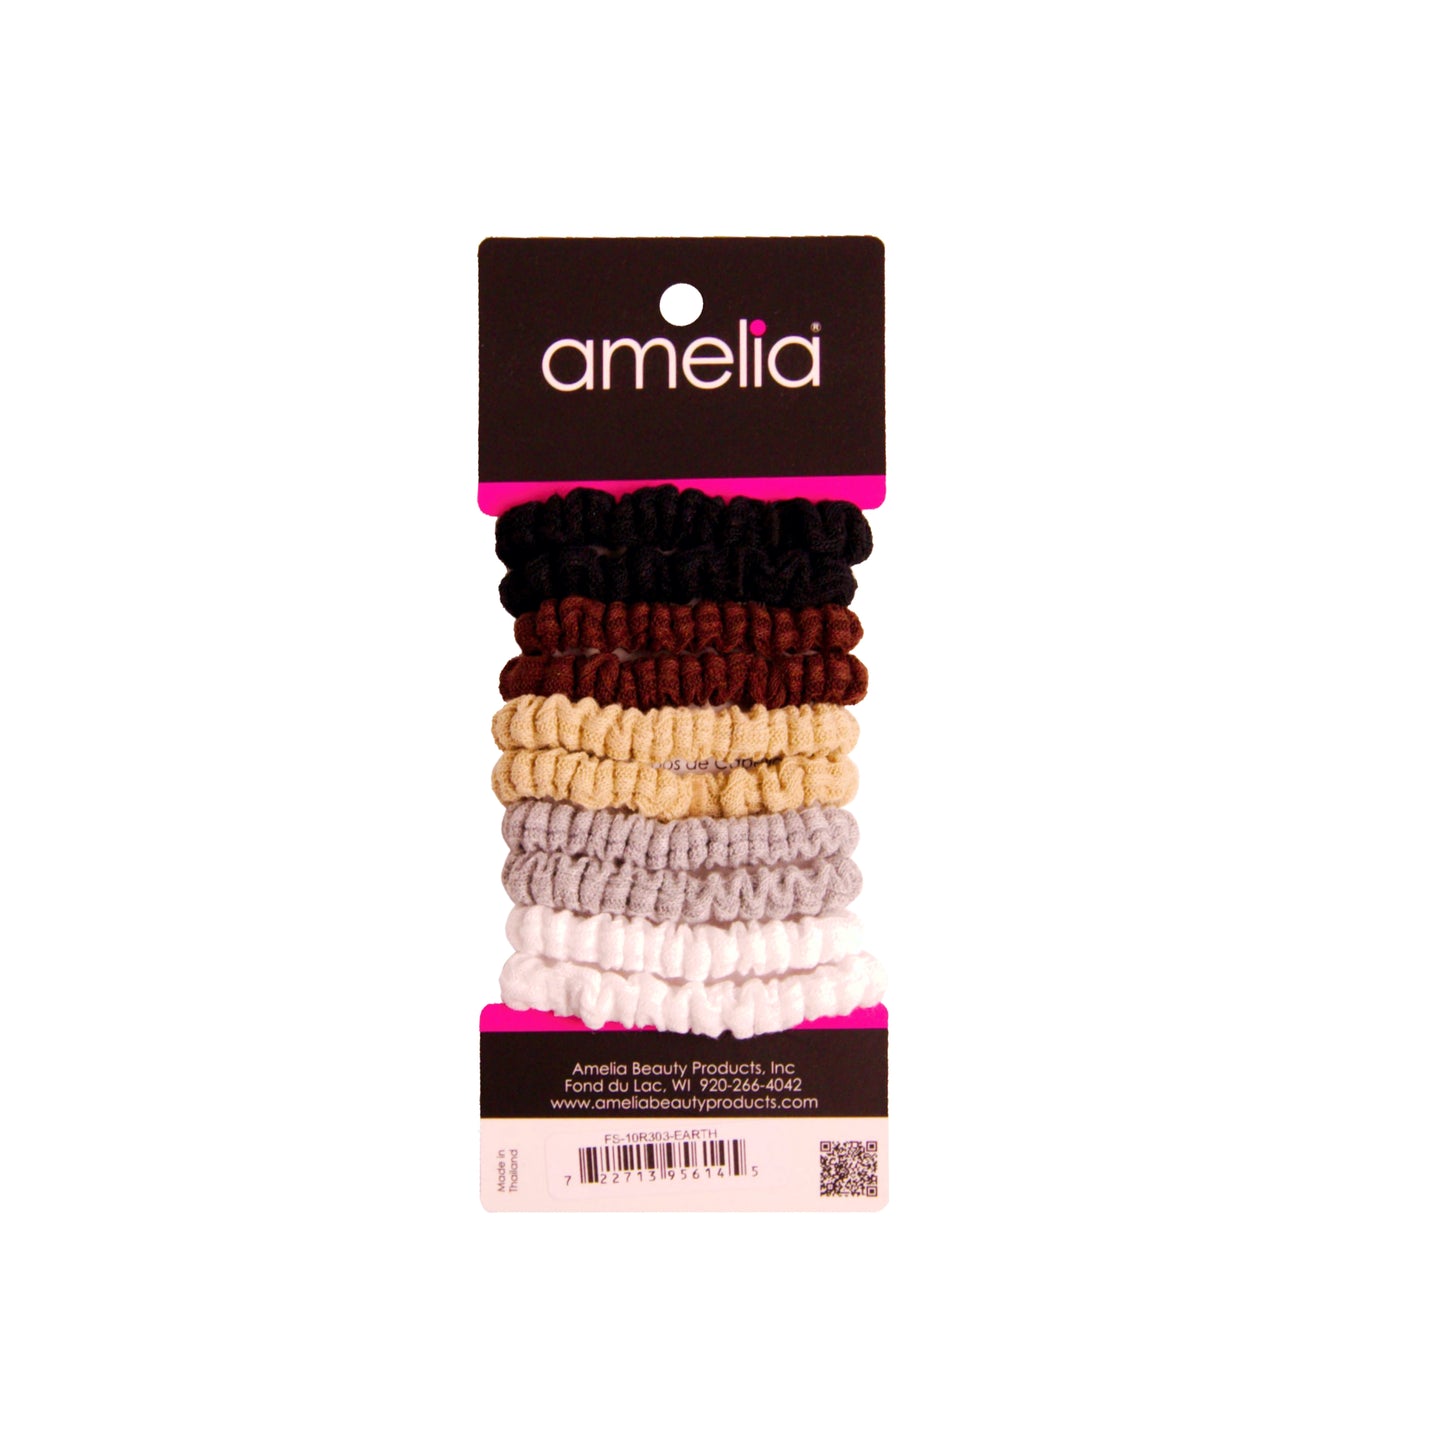 Amelia Beauty, Earth Tone Mix Ribbed Scrunchies, 2.25in Diameter, Gentle on Hair, Strong Hold, No Snag, No Dents or Creases. 10 Pack